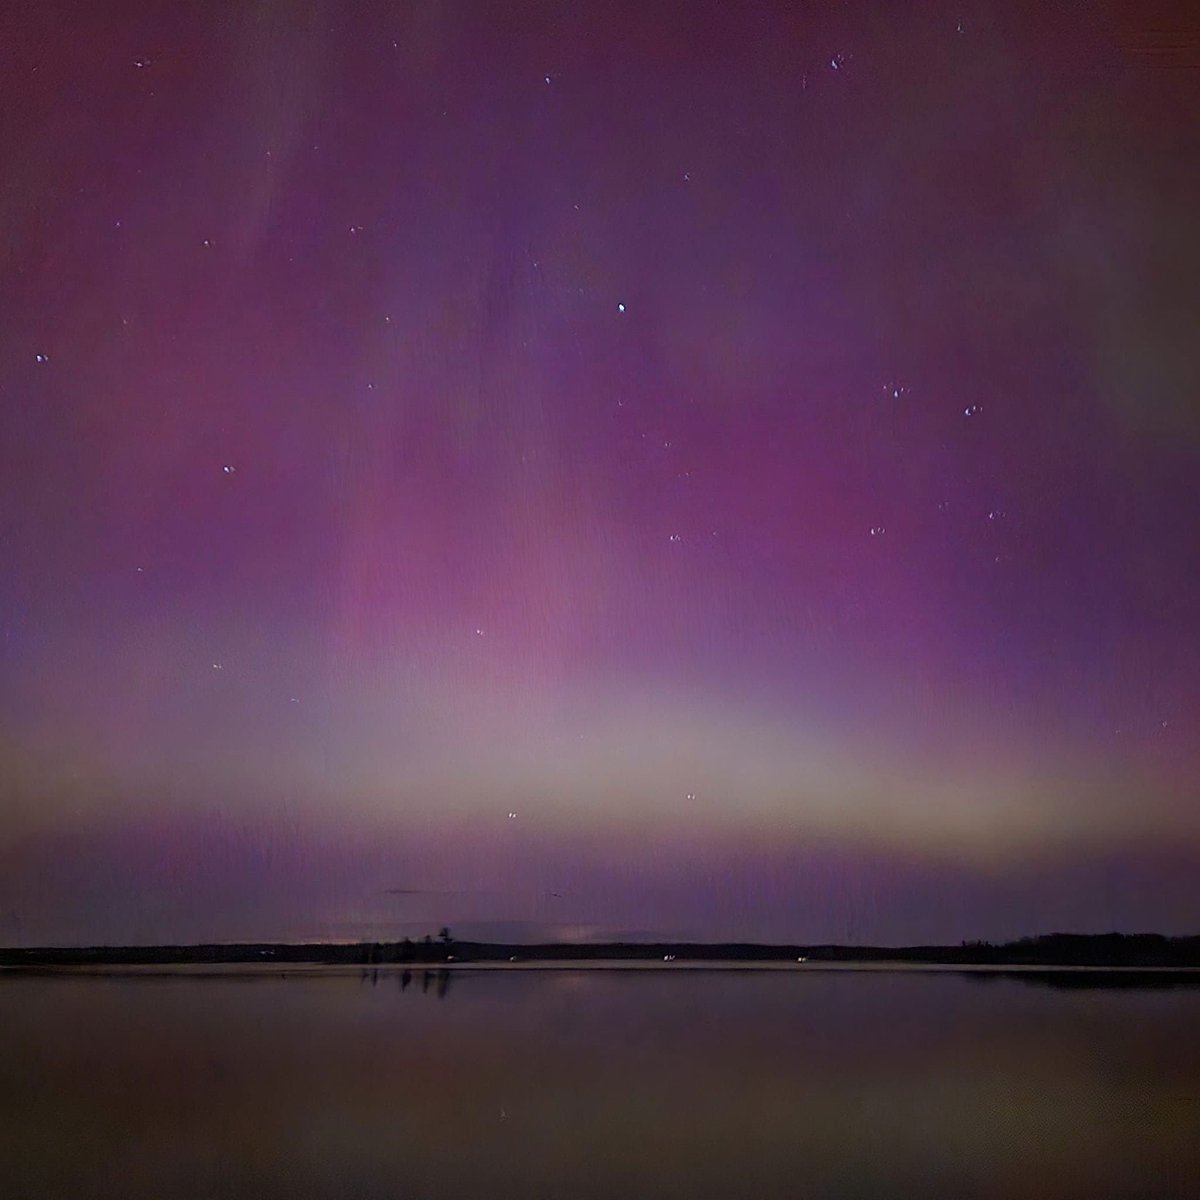 More views from last night's Northern Light show, taking from the Maritimes, Canada

#NorthernLights